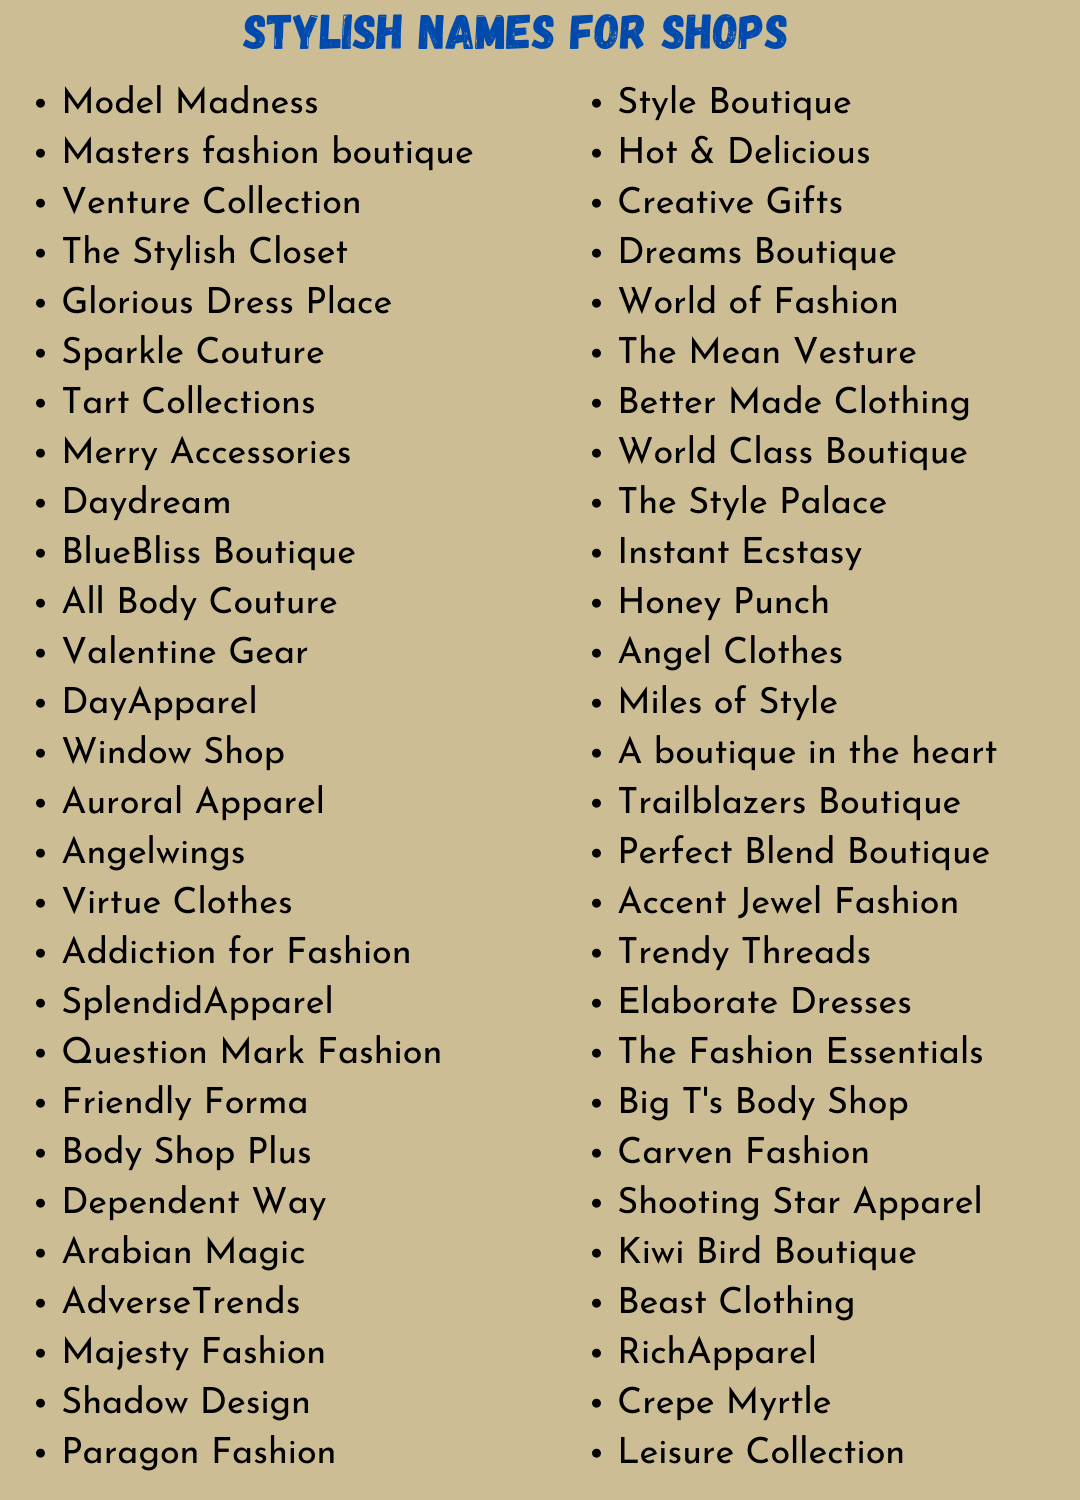 Stylish Names for Shops